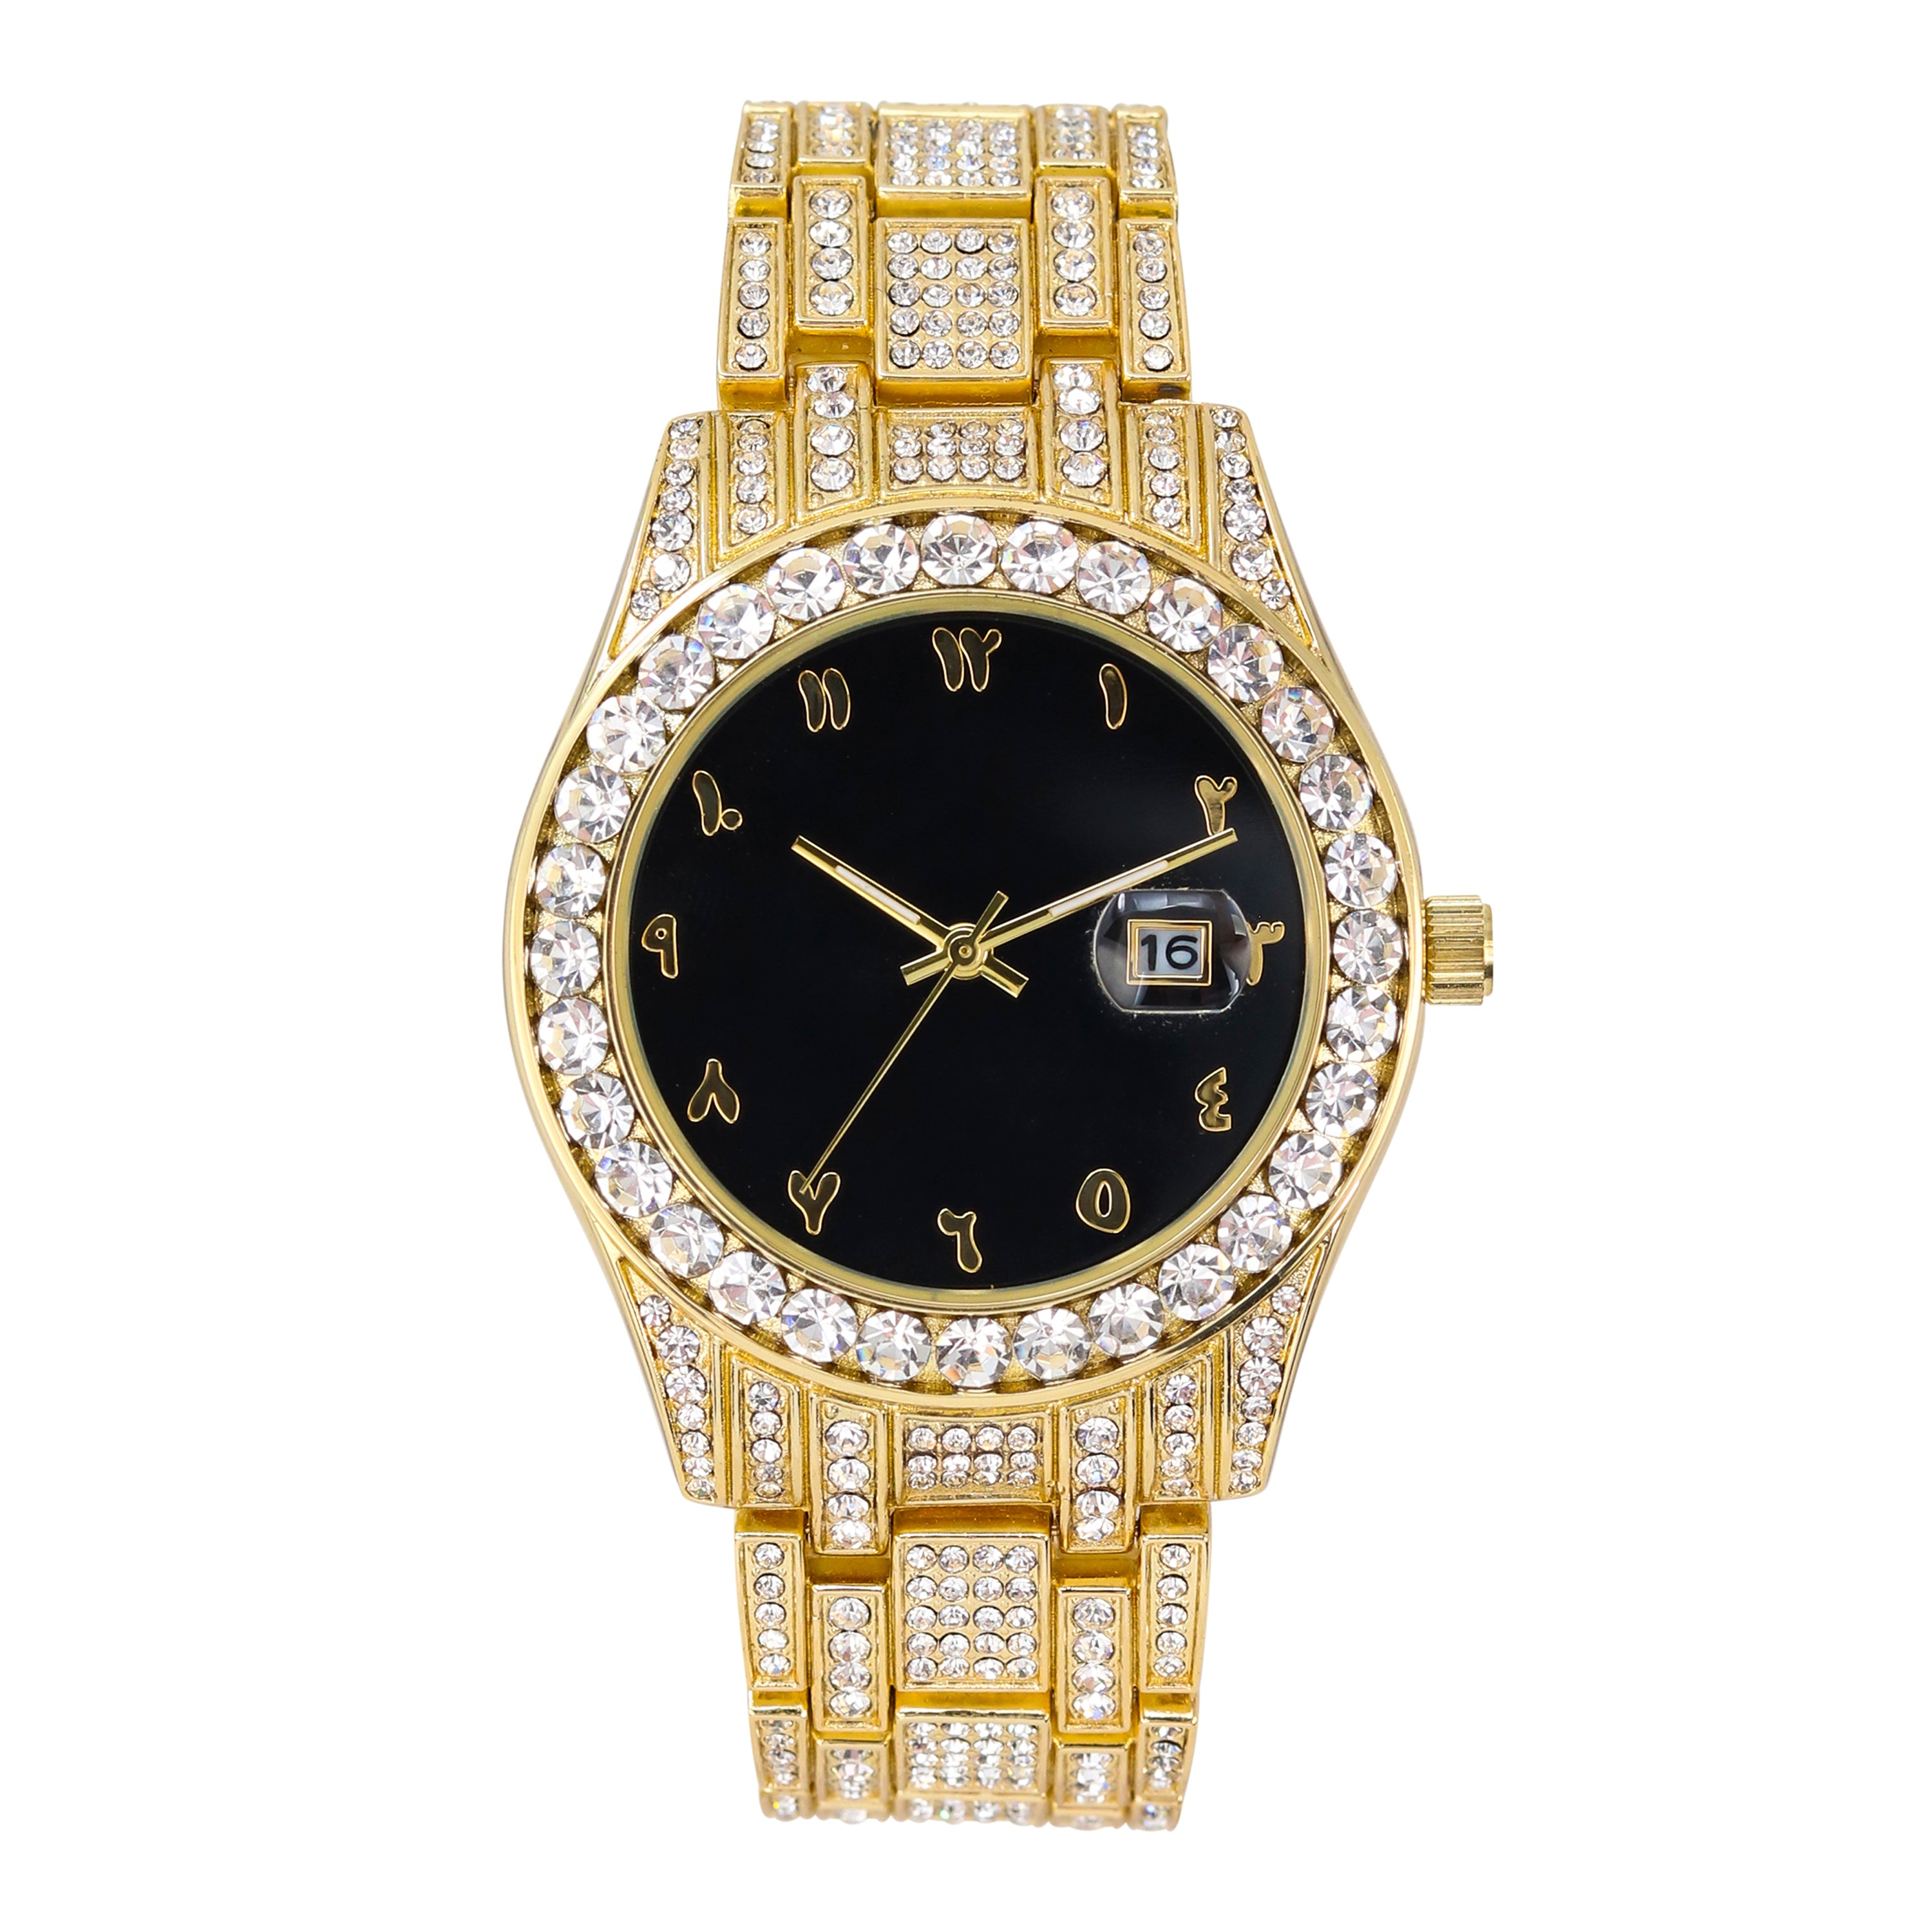 40mm Iced Out Round Arab Dial Watch Gold Black